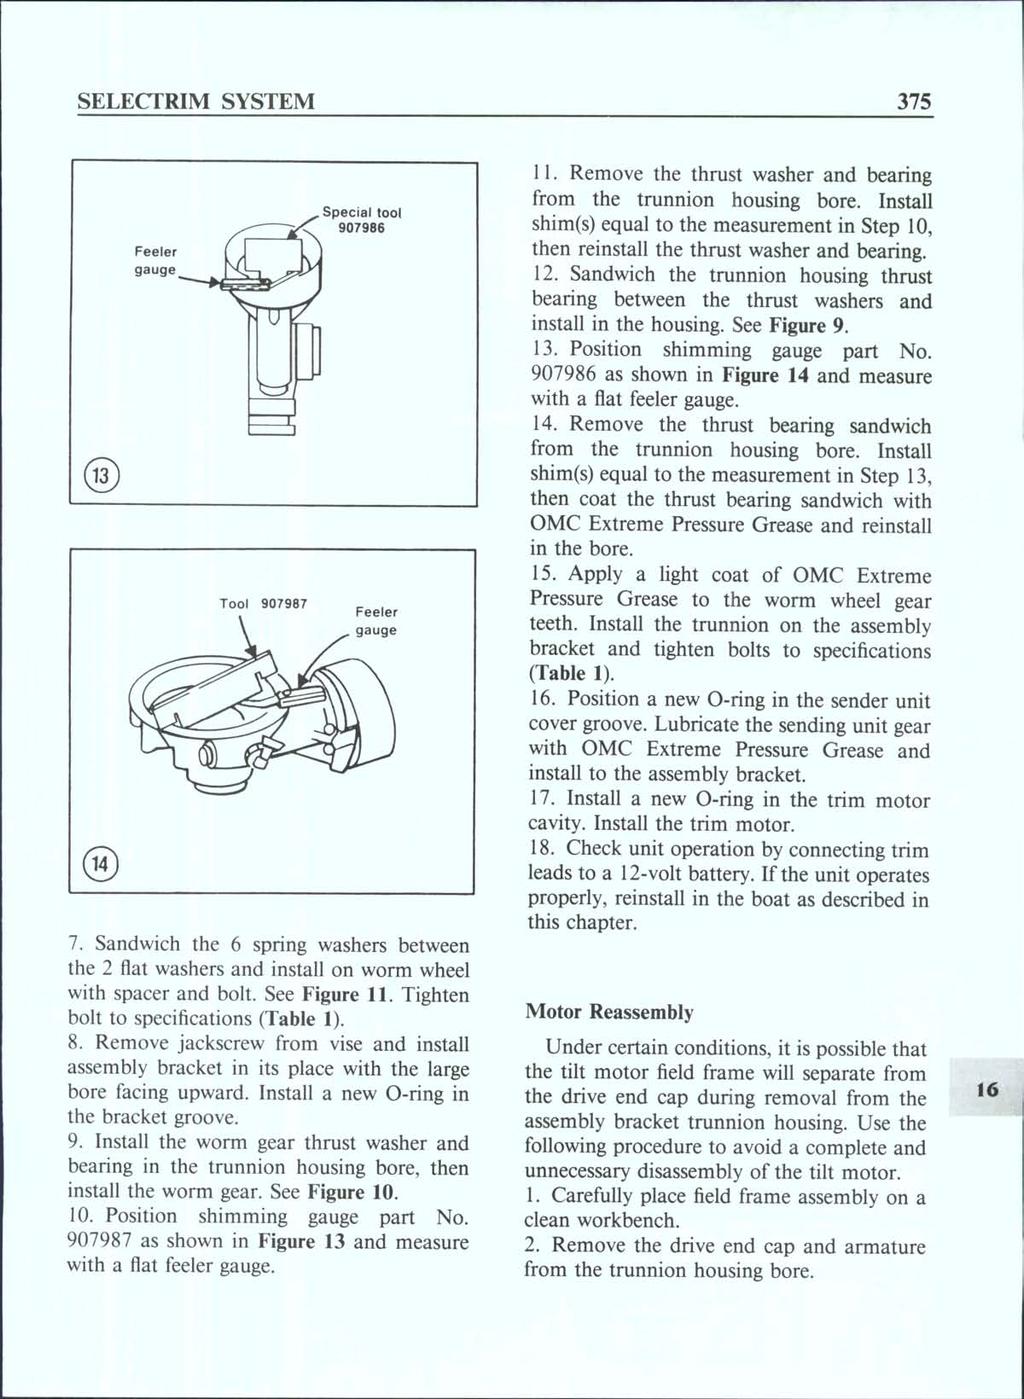 SELECTRIM SYSTEM 375 Special tool 907986 7. Sandwich the 6 spring washers between the 2 flat washers and install on worm wheel with spacer and boh. See Figure 11.